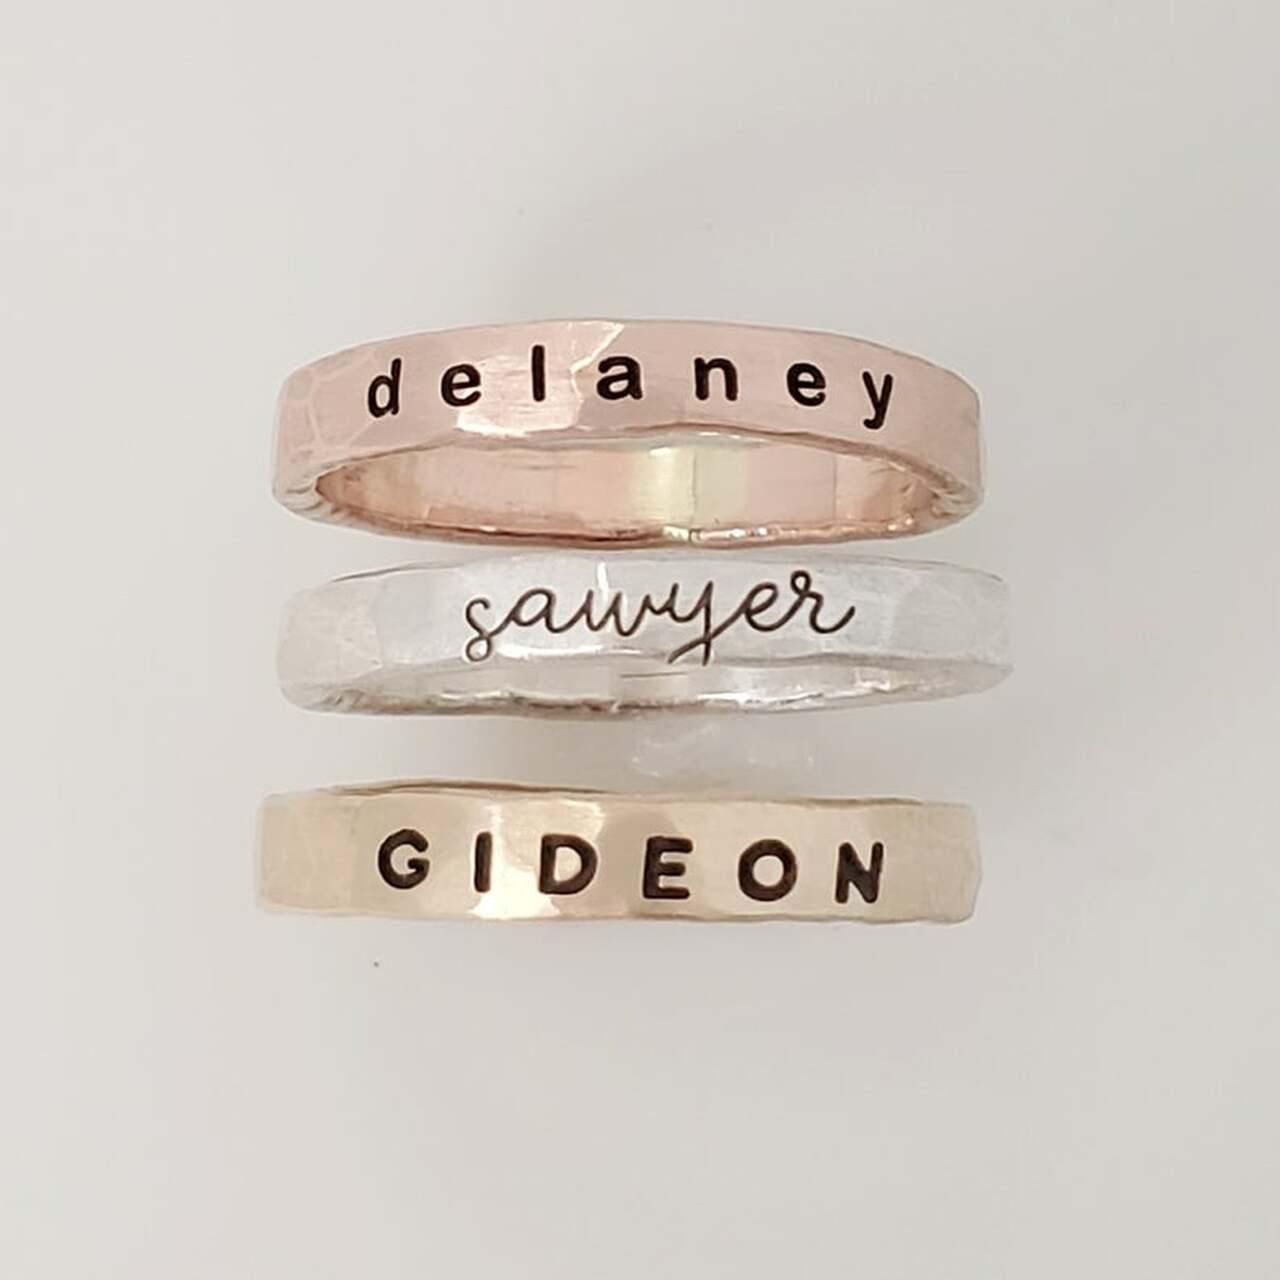 Wider Name Ring - Going Golden